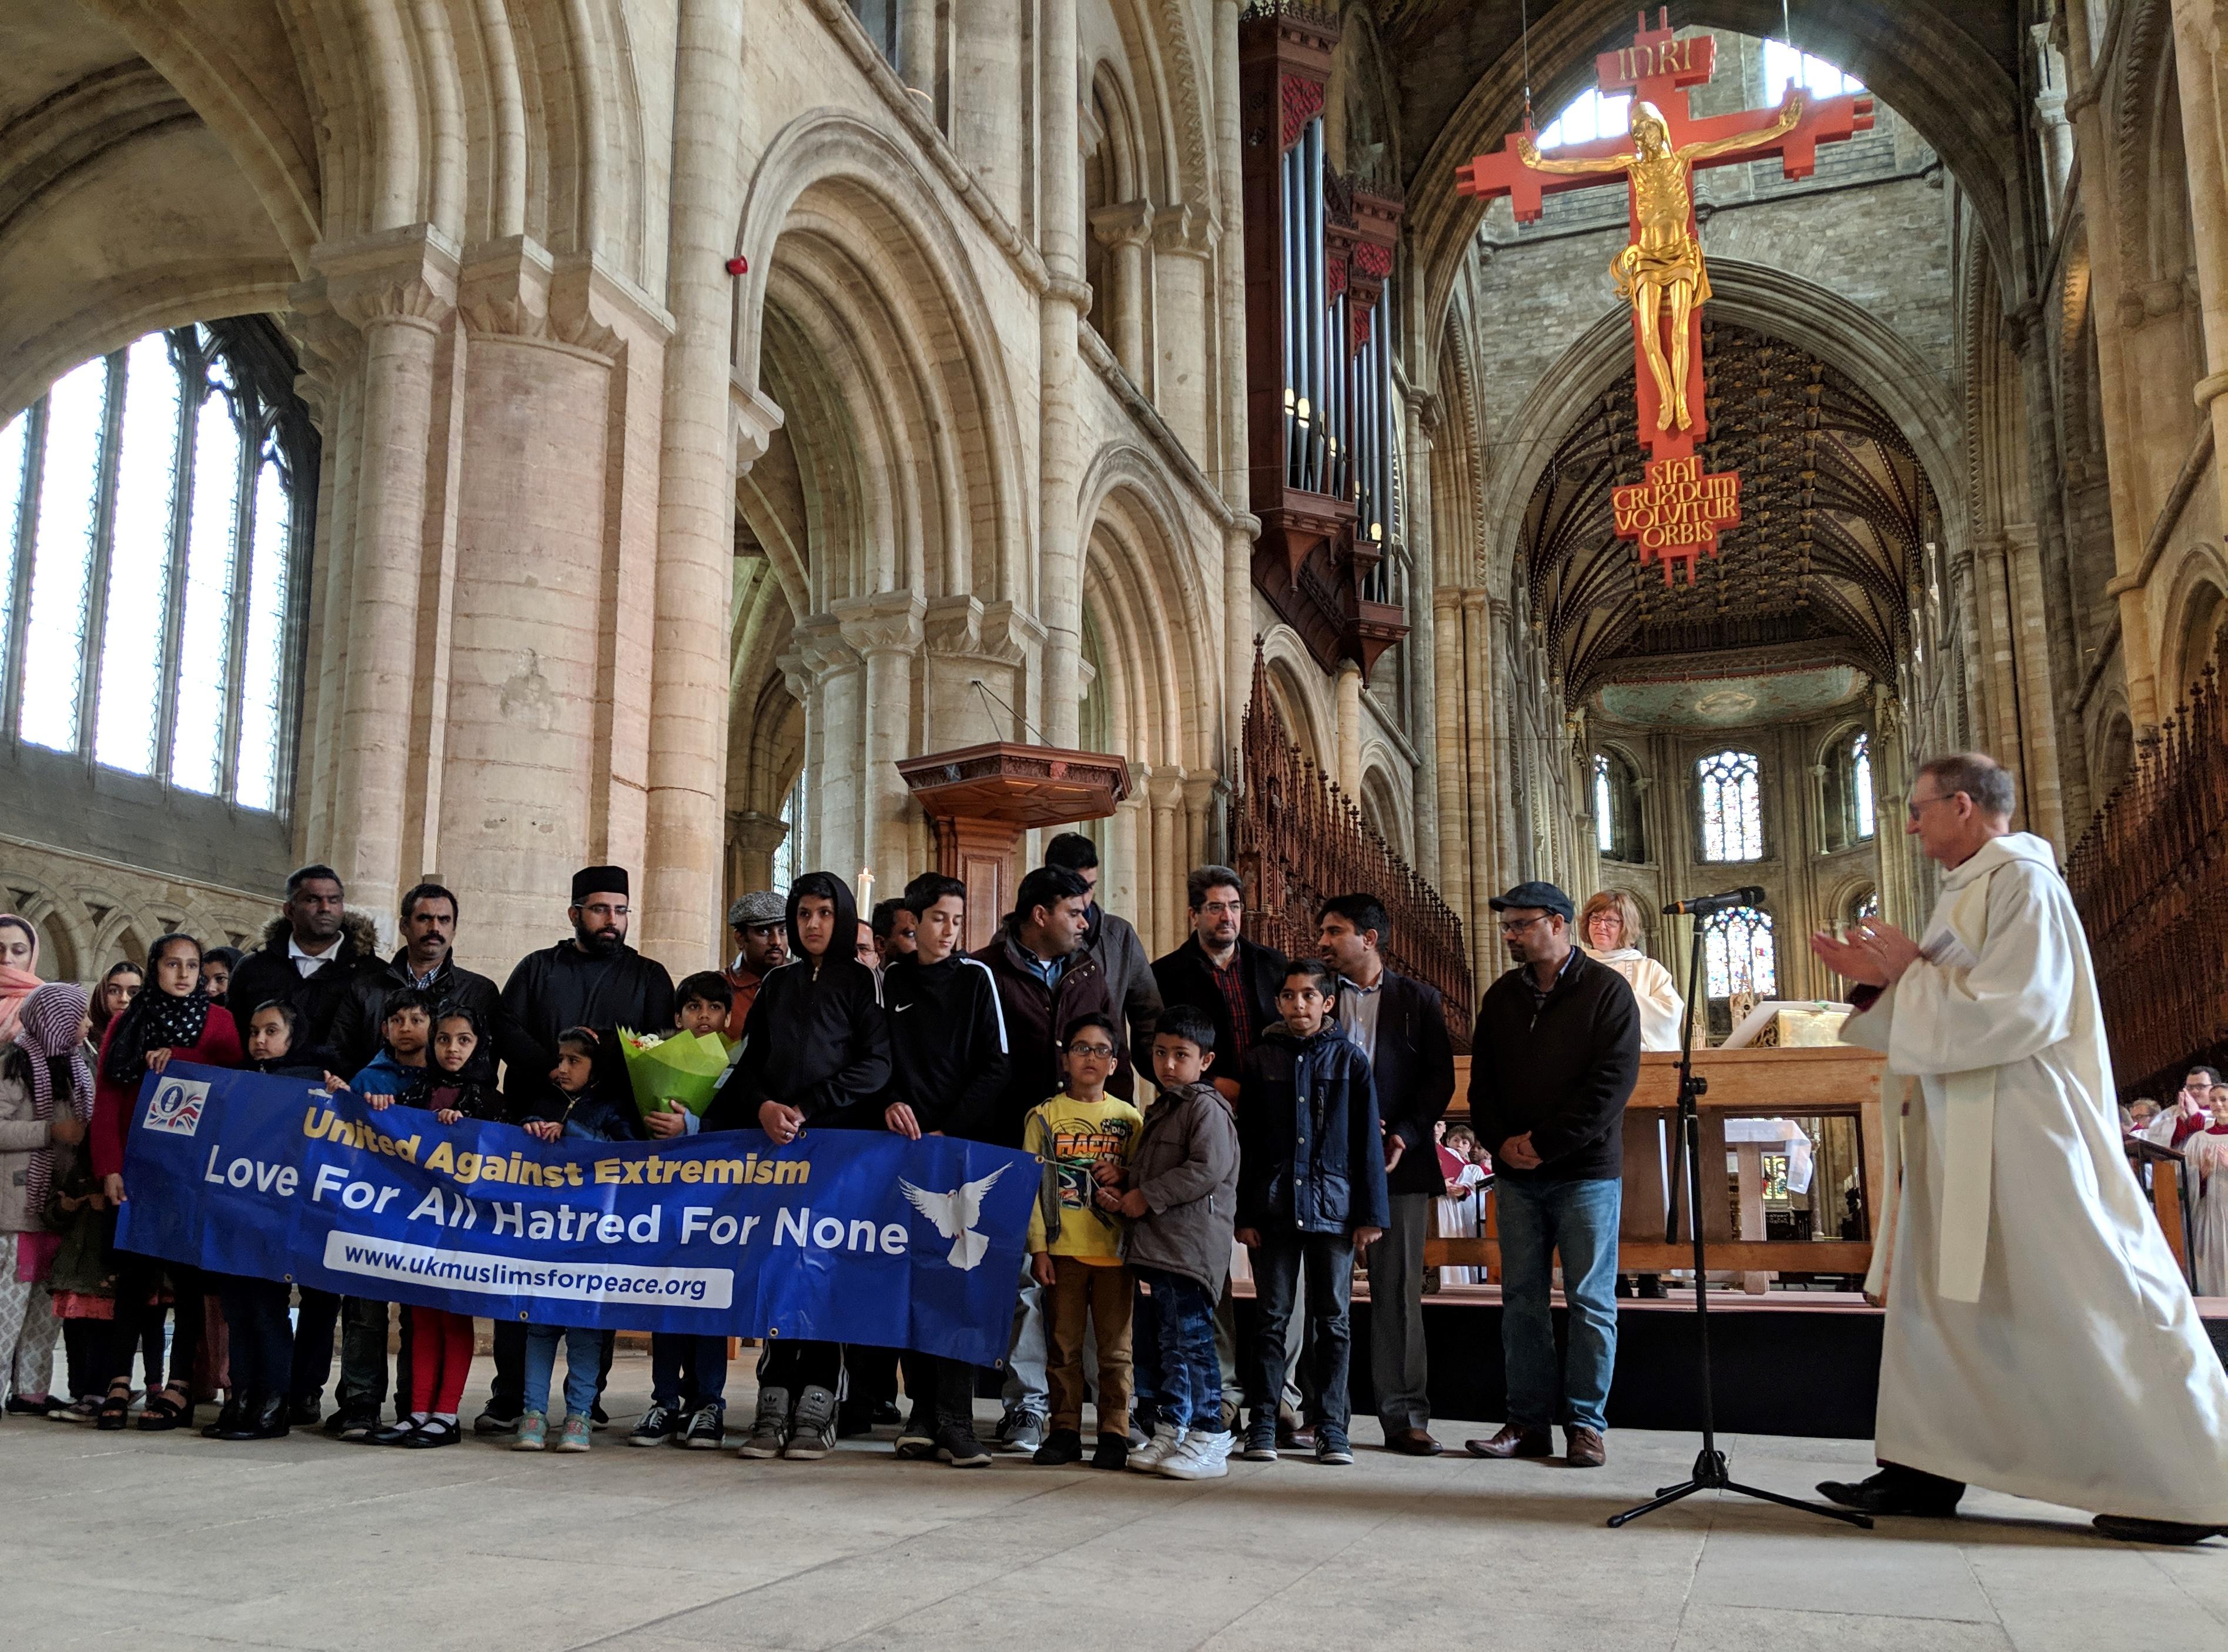 The delegation from the Ahmadiyya Muslim community at the Cathedral.